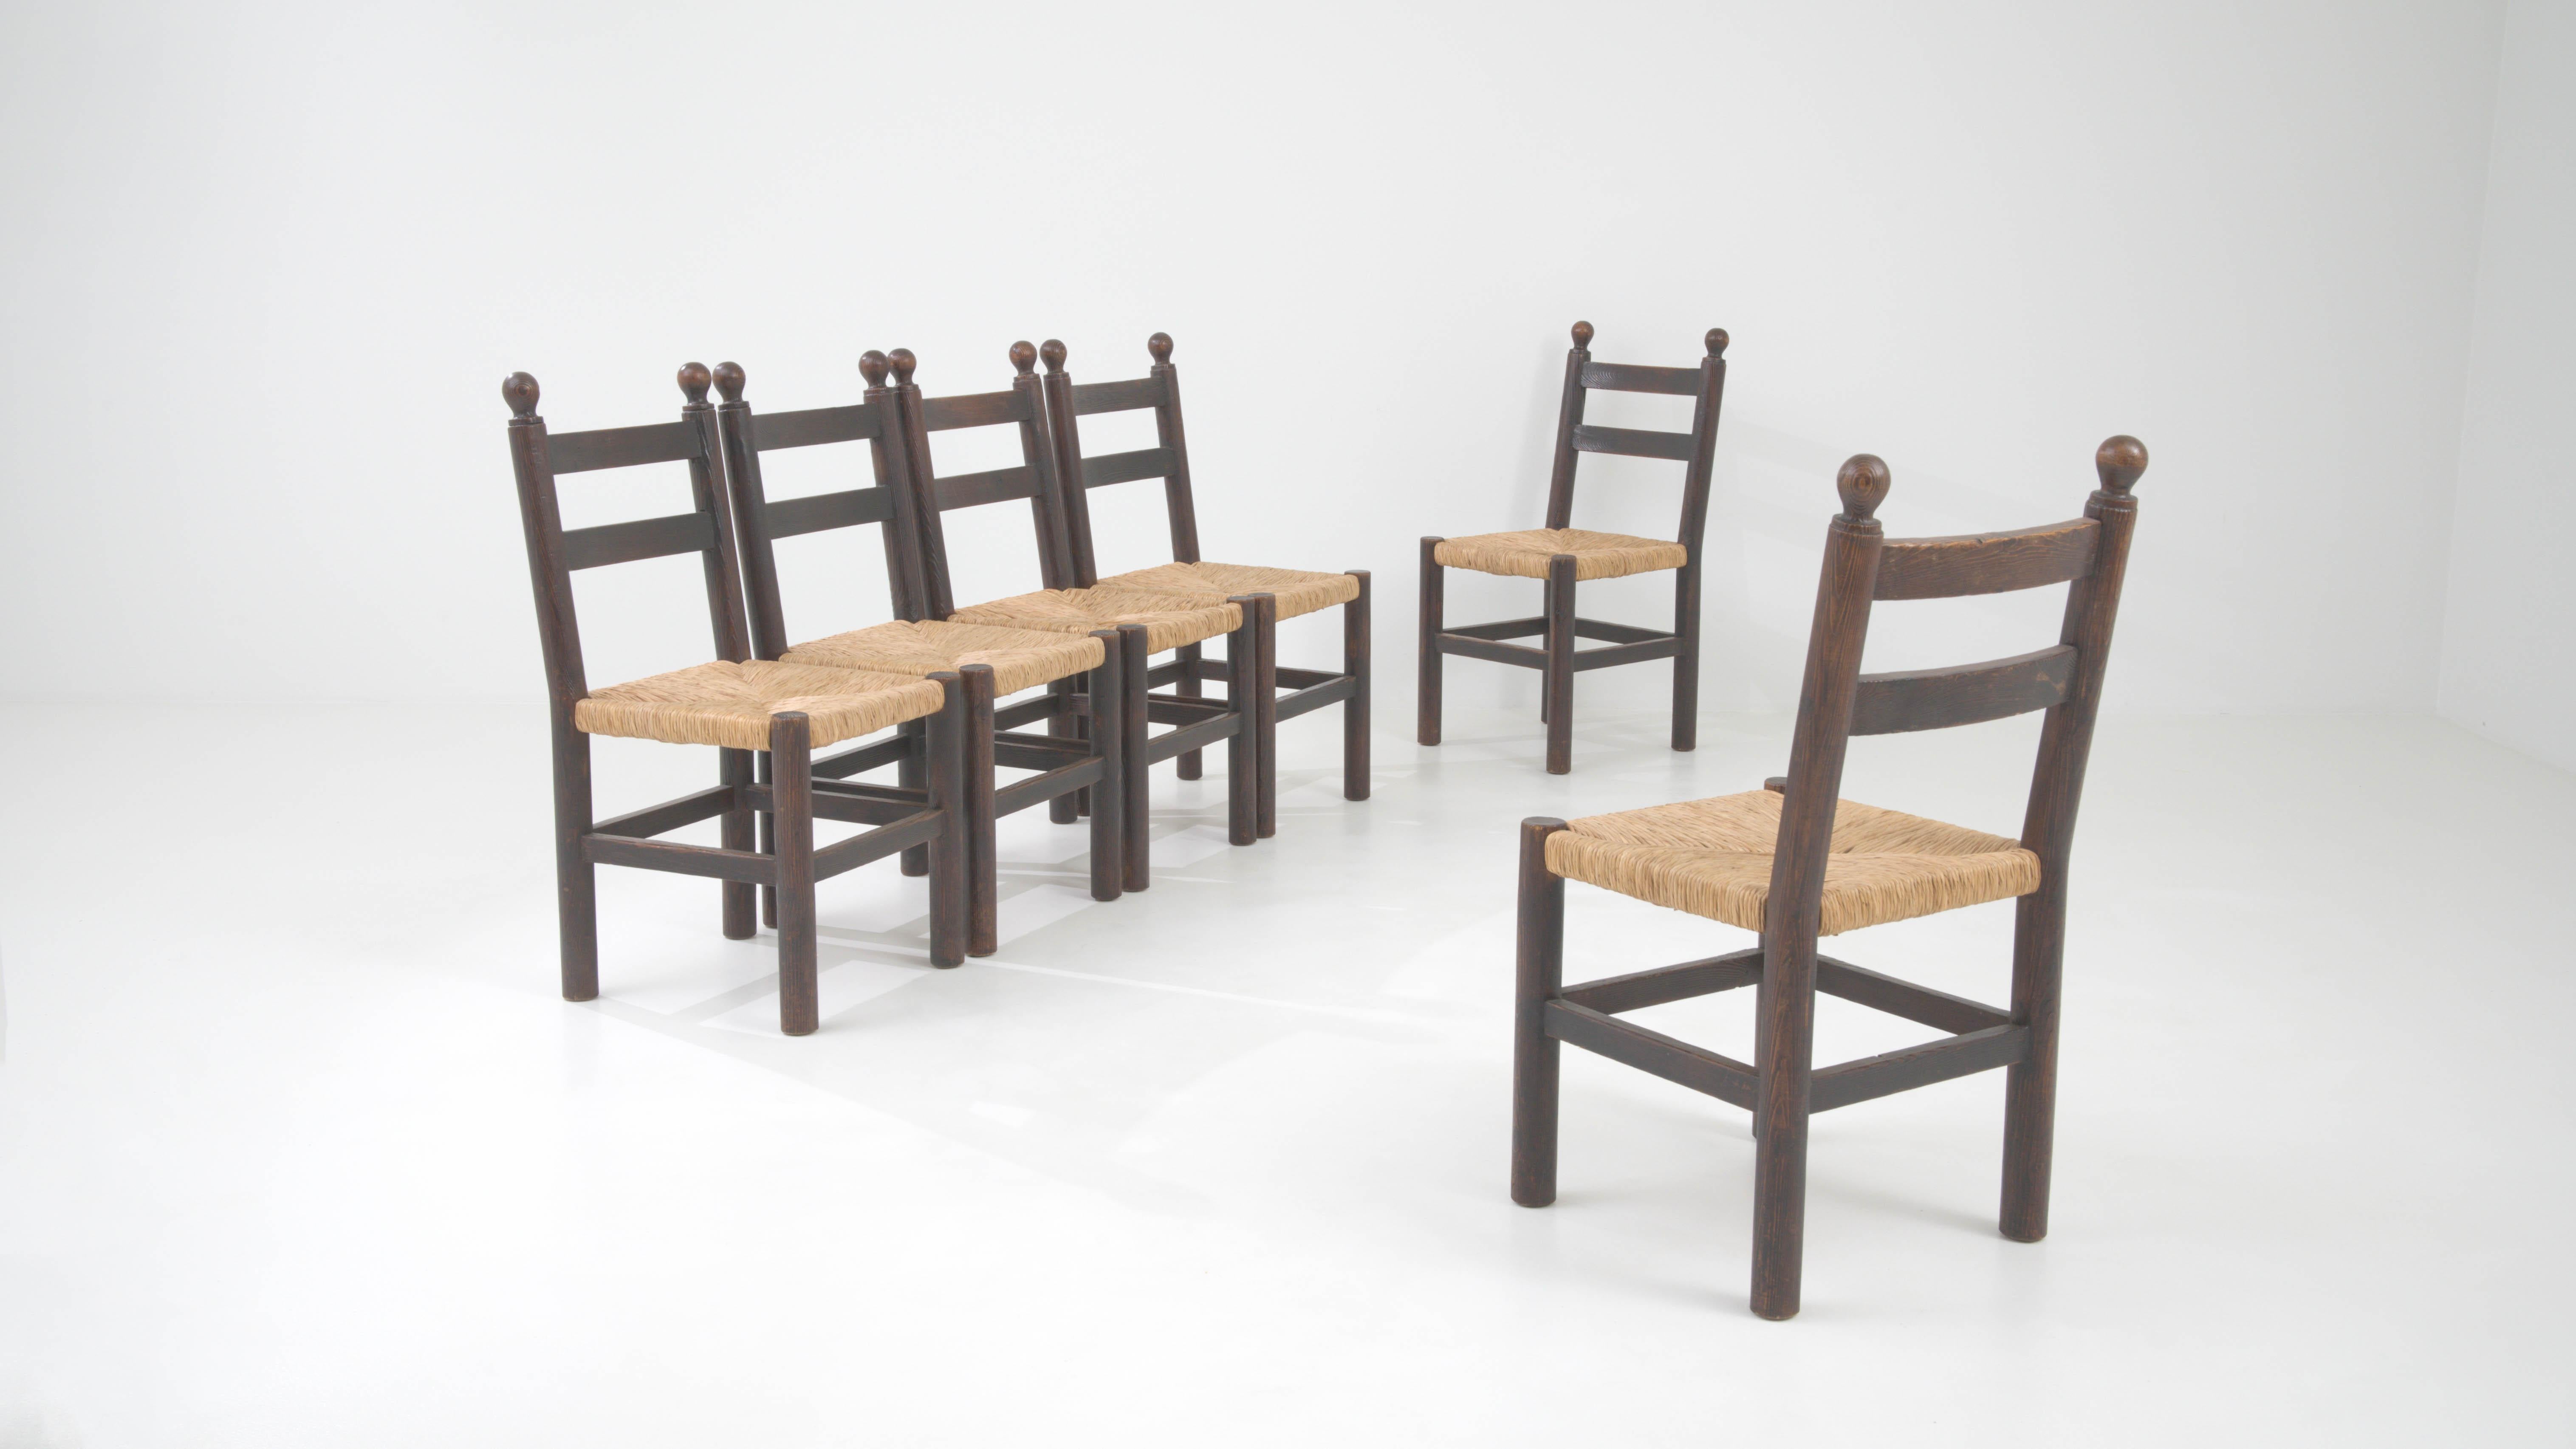 20th Century French Wooden Dining Chairs With Wicker Seats, Set of 6 For Sale 1